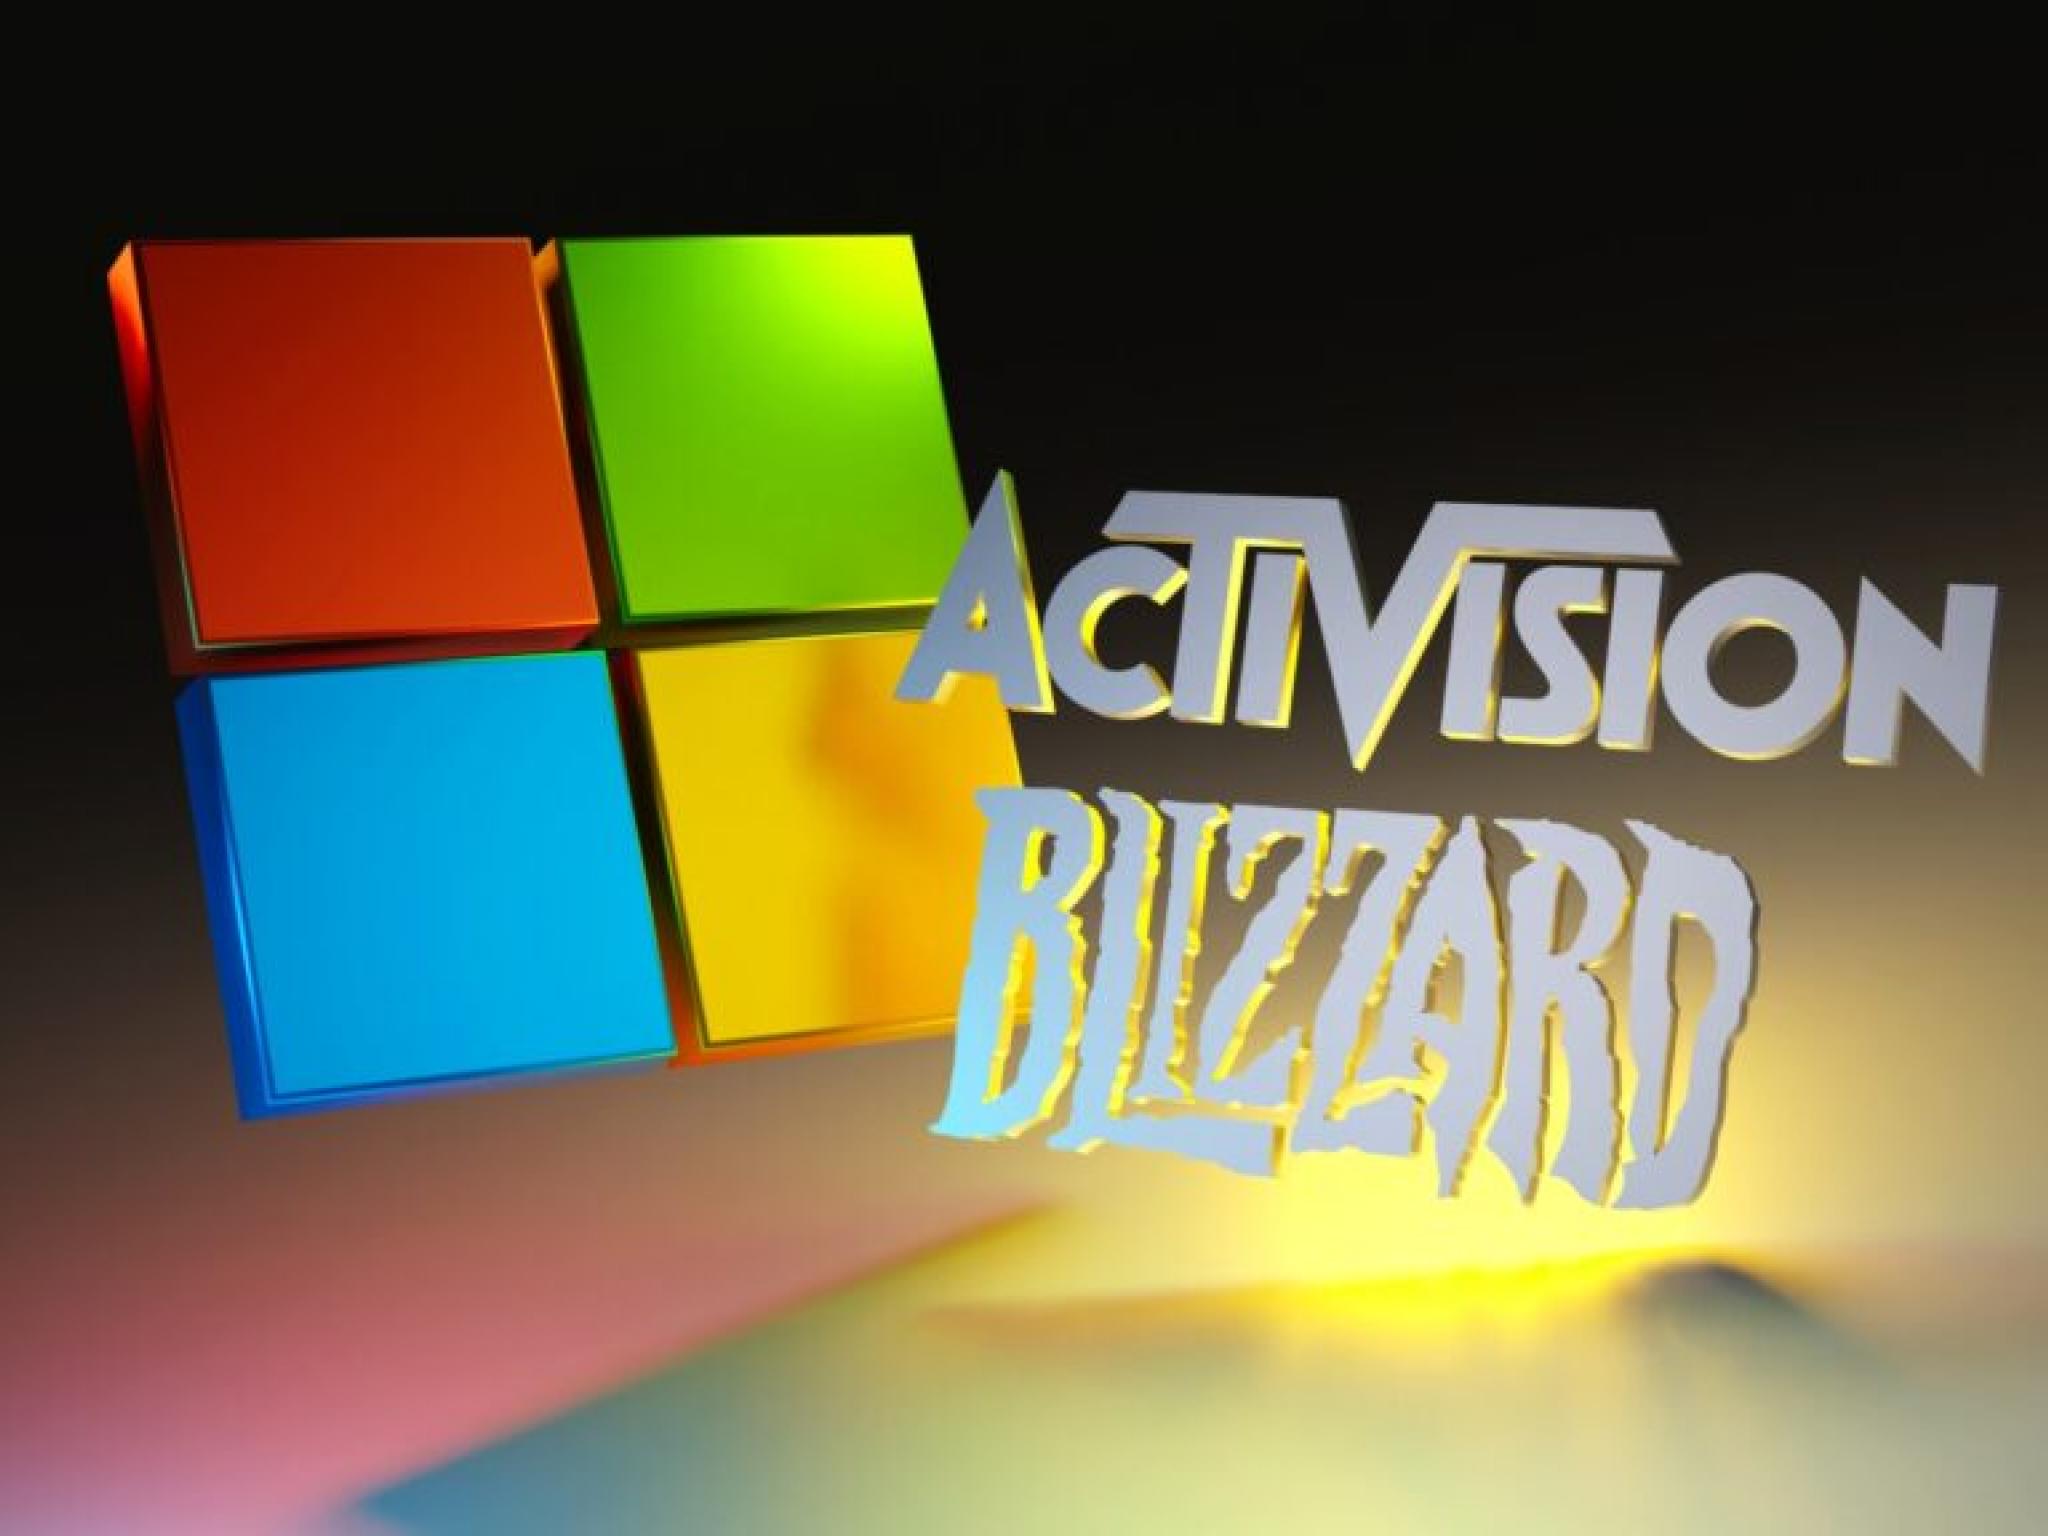  activision-blizzard-ordered-to-pay-234m-for-patent-infringement 